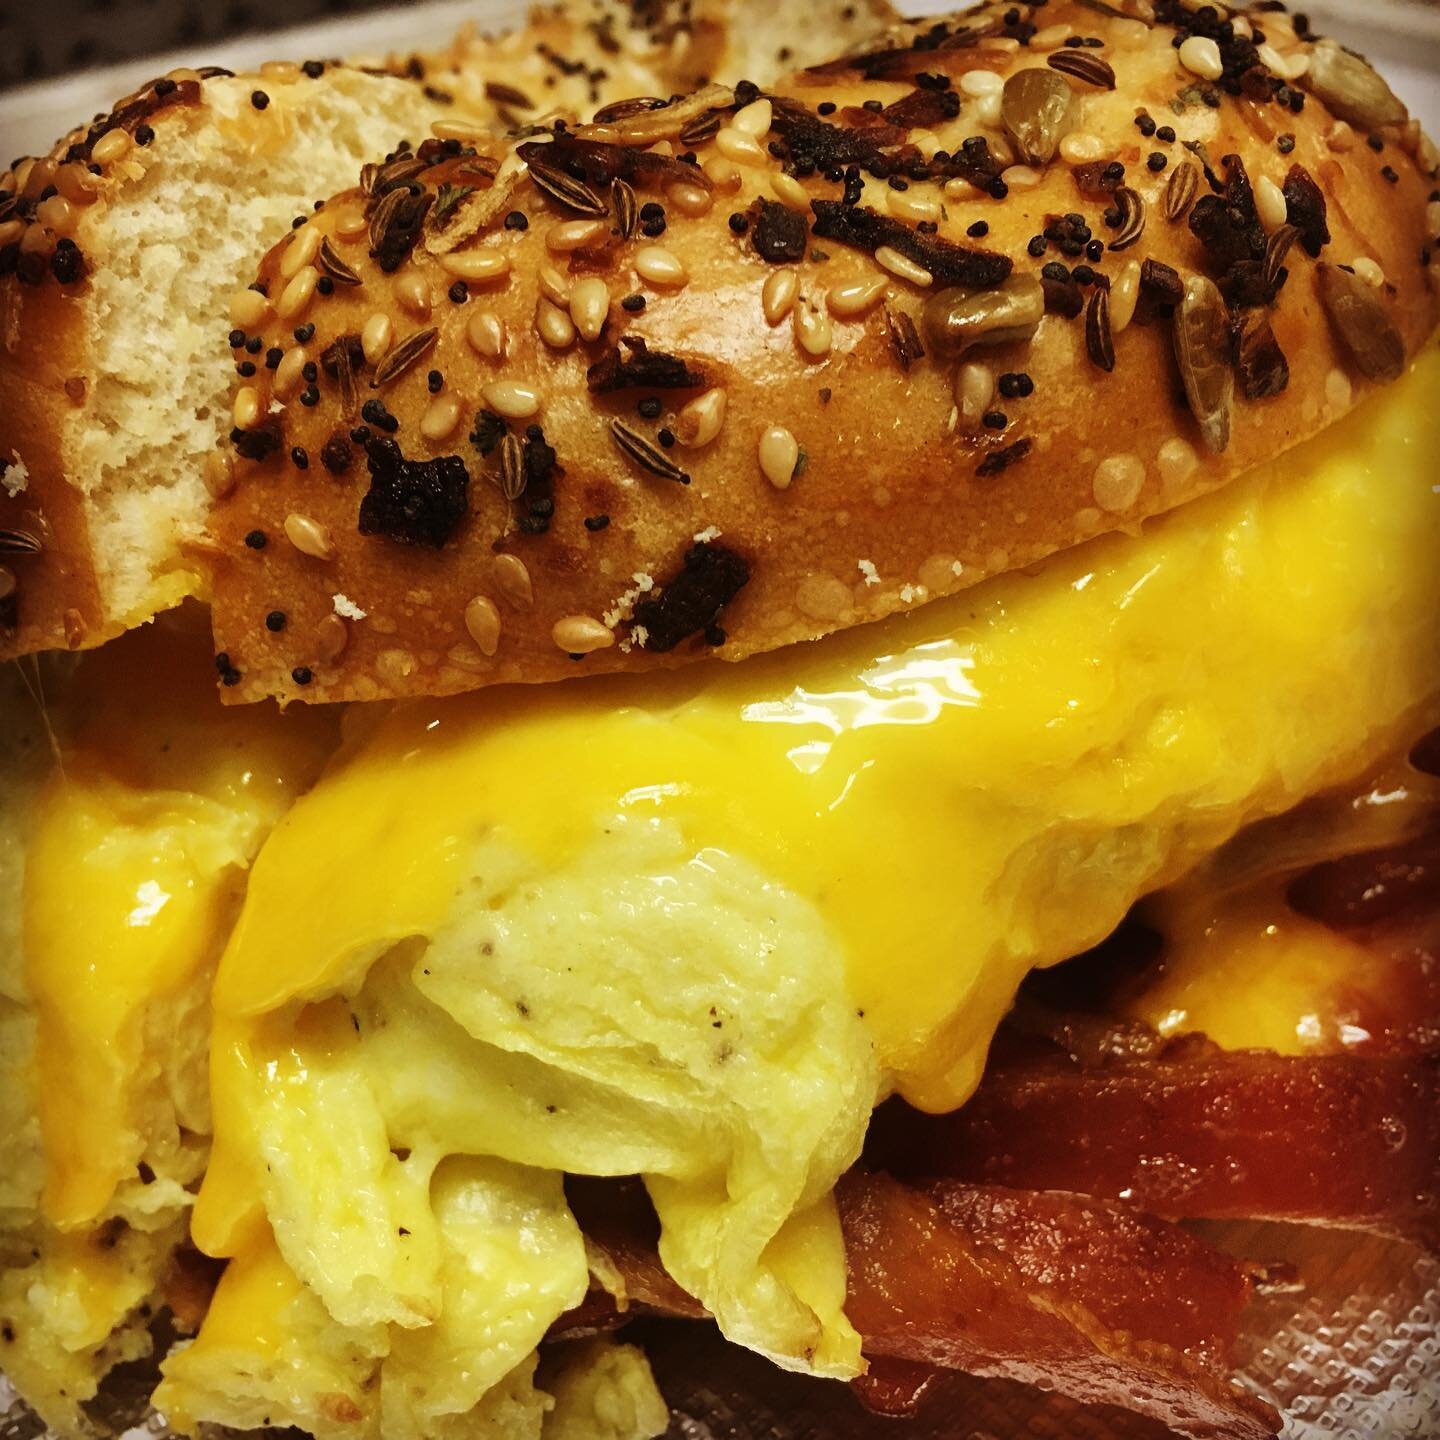 Eggs, cheddar and bacon on an everything bagel.  Breakfast for the win! 👍🏻 #breakfast #cagefreeeggs #eggs #eggsandwich #cheese #cheddar #bacon #bagel #bagelsandwich #sandiegorestaurants #sandiegofood #localbusiness #local #localfood #smallbusiness 